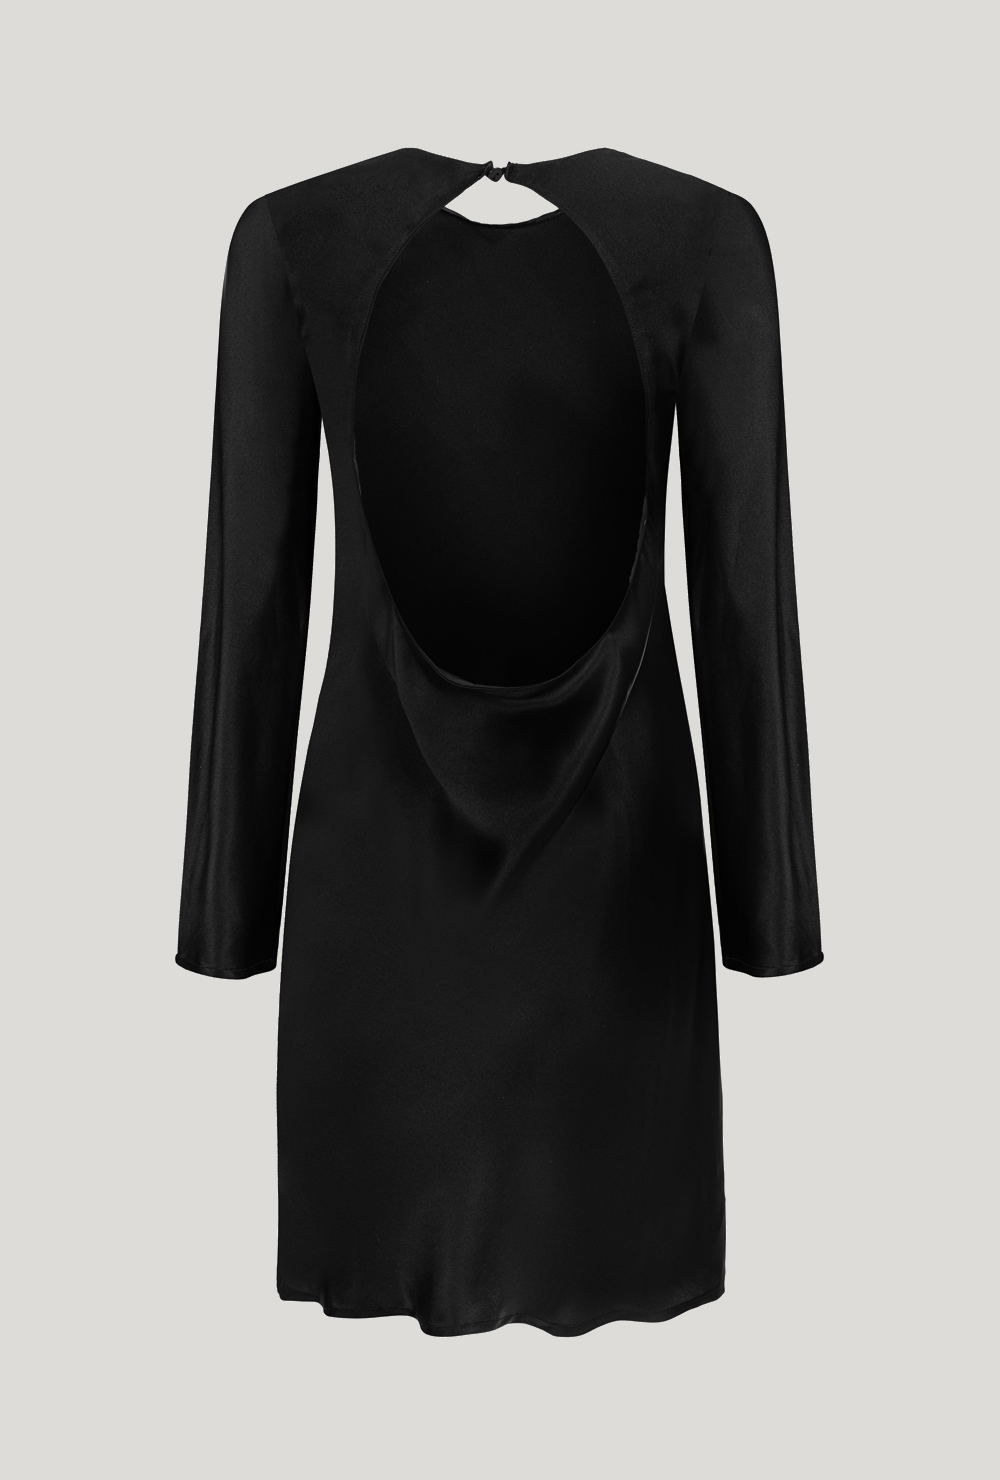 Black silk mini dress with long sleeves and